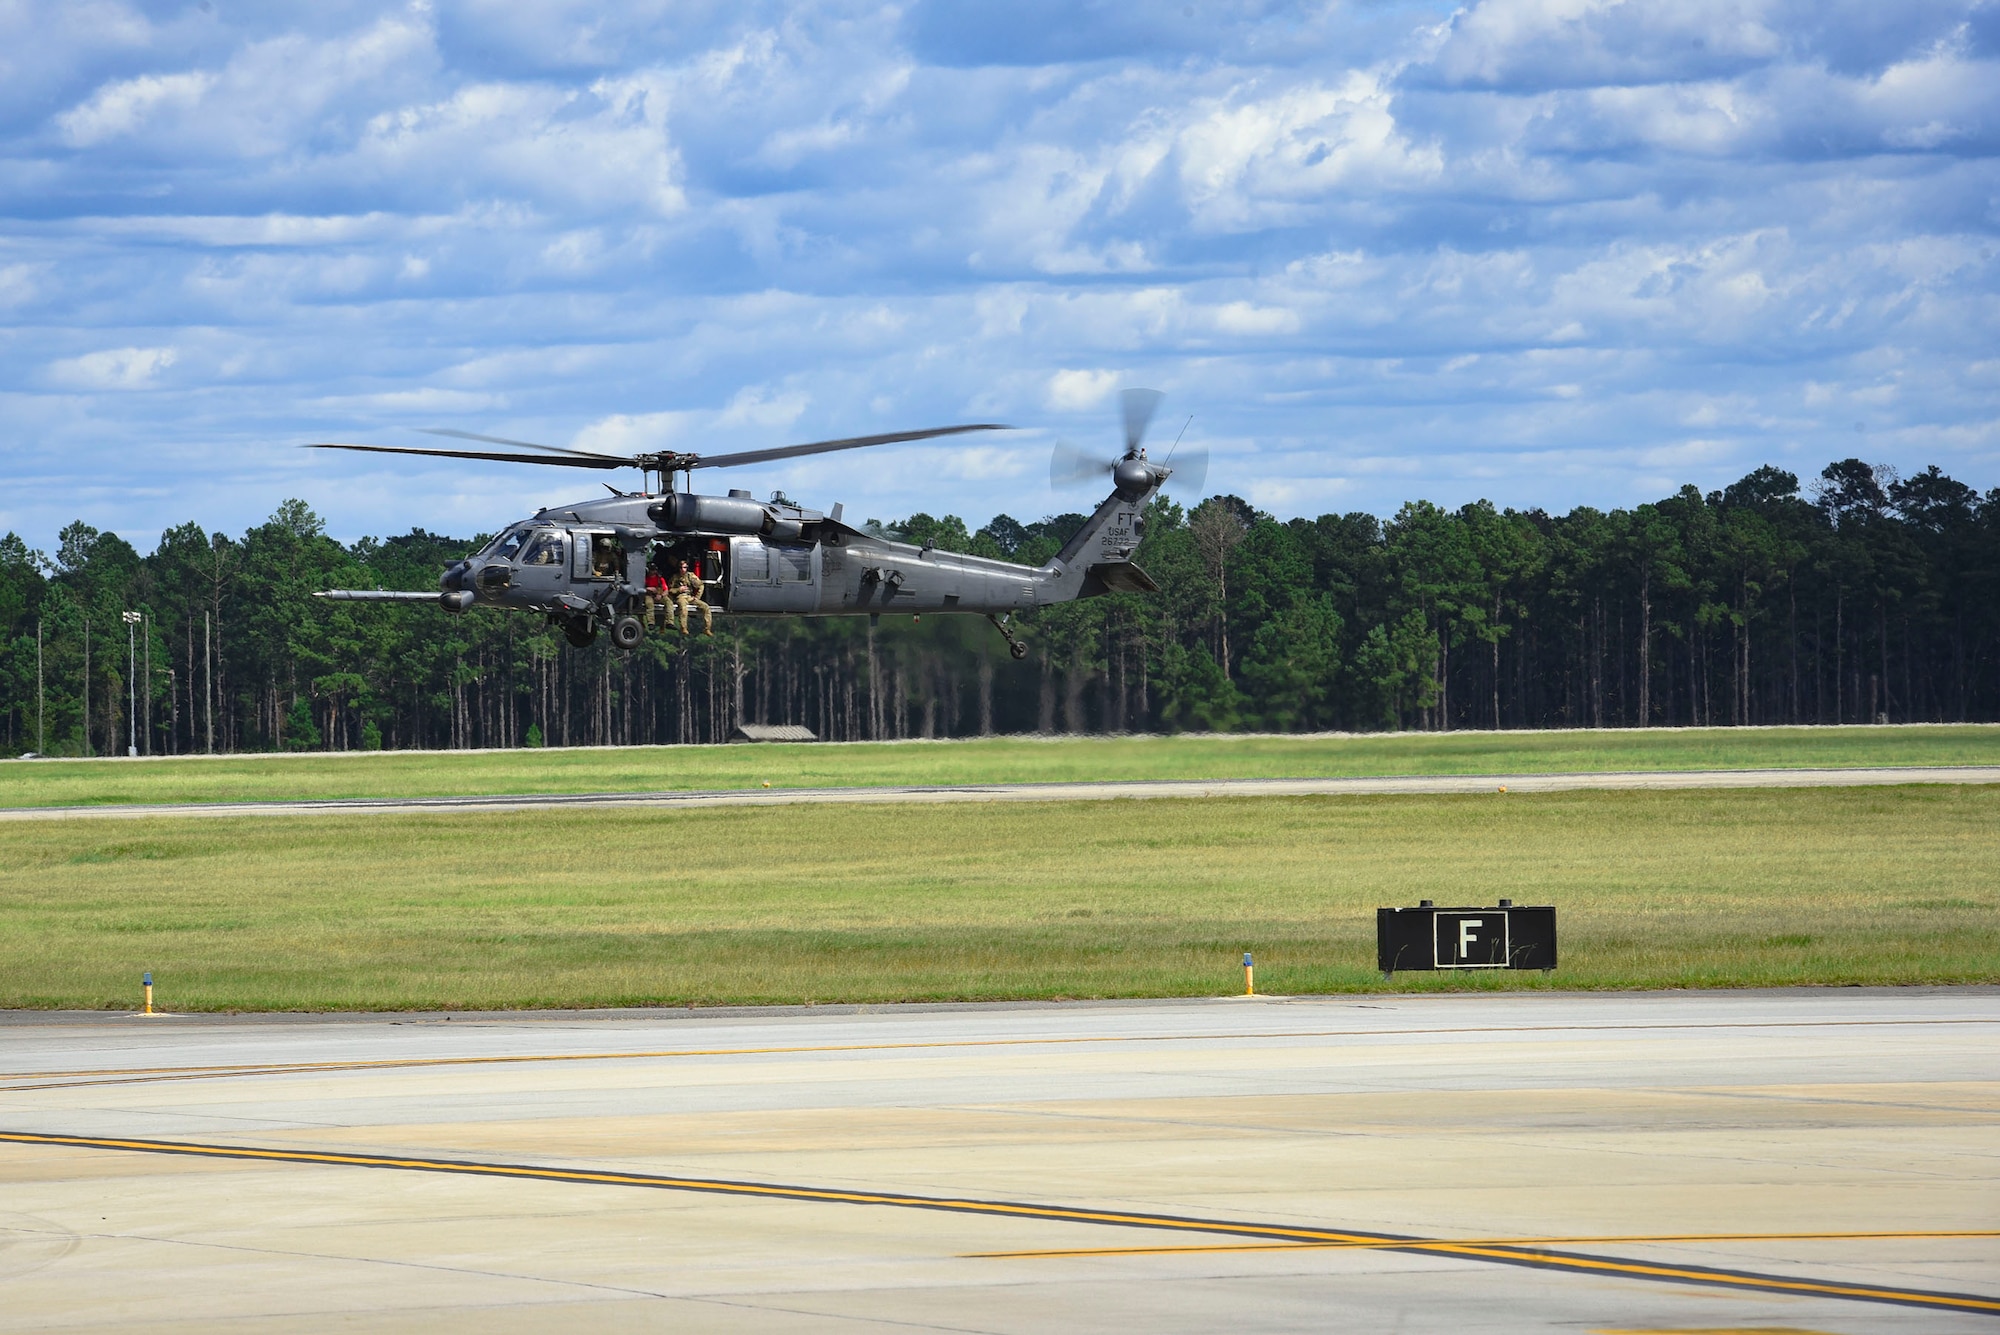 An HH-60G Pavehawk helicopter launches in support of Tropical Storm Florence relief operations, Sept. 15, 2018, at Moody Air Force Base, Ga. The 334th Air Expeditionary Group launched HC-130J Combat King IIs, HH-60G Pavehawks, aircrew and support personnel to pre-position at Joint Base Charleston, S.C., for potential Tropical Storm Florence response. Under the command of Col. John Creel, the 374th Rescue Group commander, the AEG integrated to make one expeditionary search and rescue unit comprised of rescue and support personnel from both the 23d Wing, 920th Rescue Wing at Patrick Air Force Base, Fla., and 51st Combat Communications Squadron at Robins Air Force Base, Ga. (U.S. Air Force photo by Senior Airman Greg Nash)